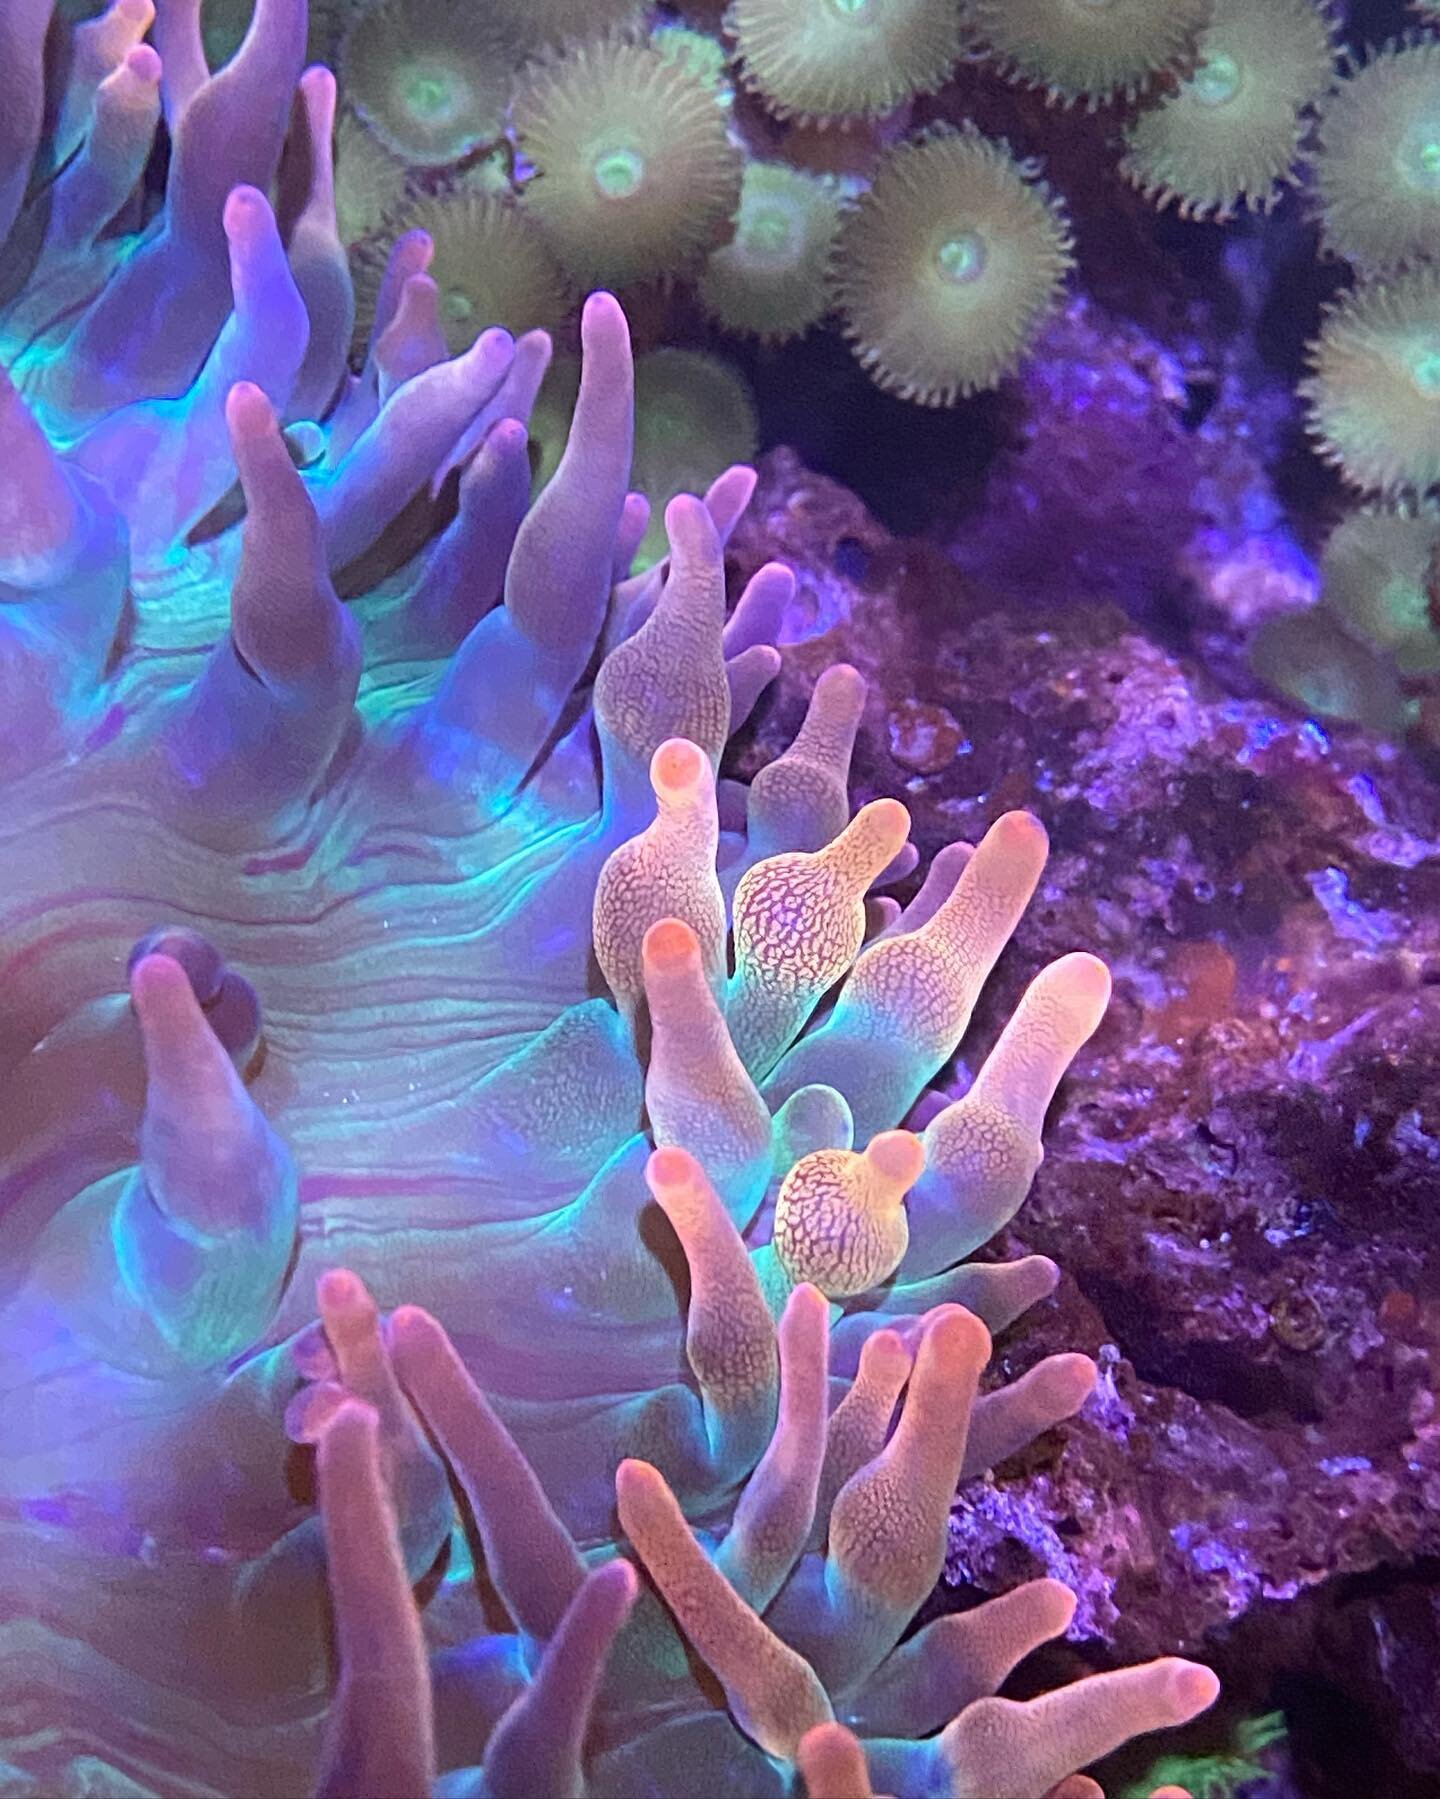 One of our rainbow bubble tips from the 220 display were showing us all the colors today. 🤩
.
.
.
#rainbowbubbletip #bubbletip #anemone #aquariumworldlafayette #lafayette #indiana #aquarium #fish #saltwater #freshwater #aquaticlife